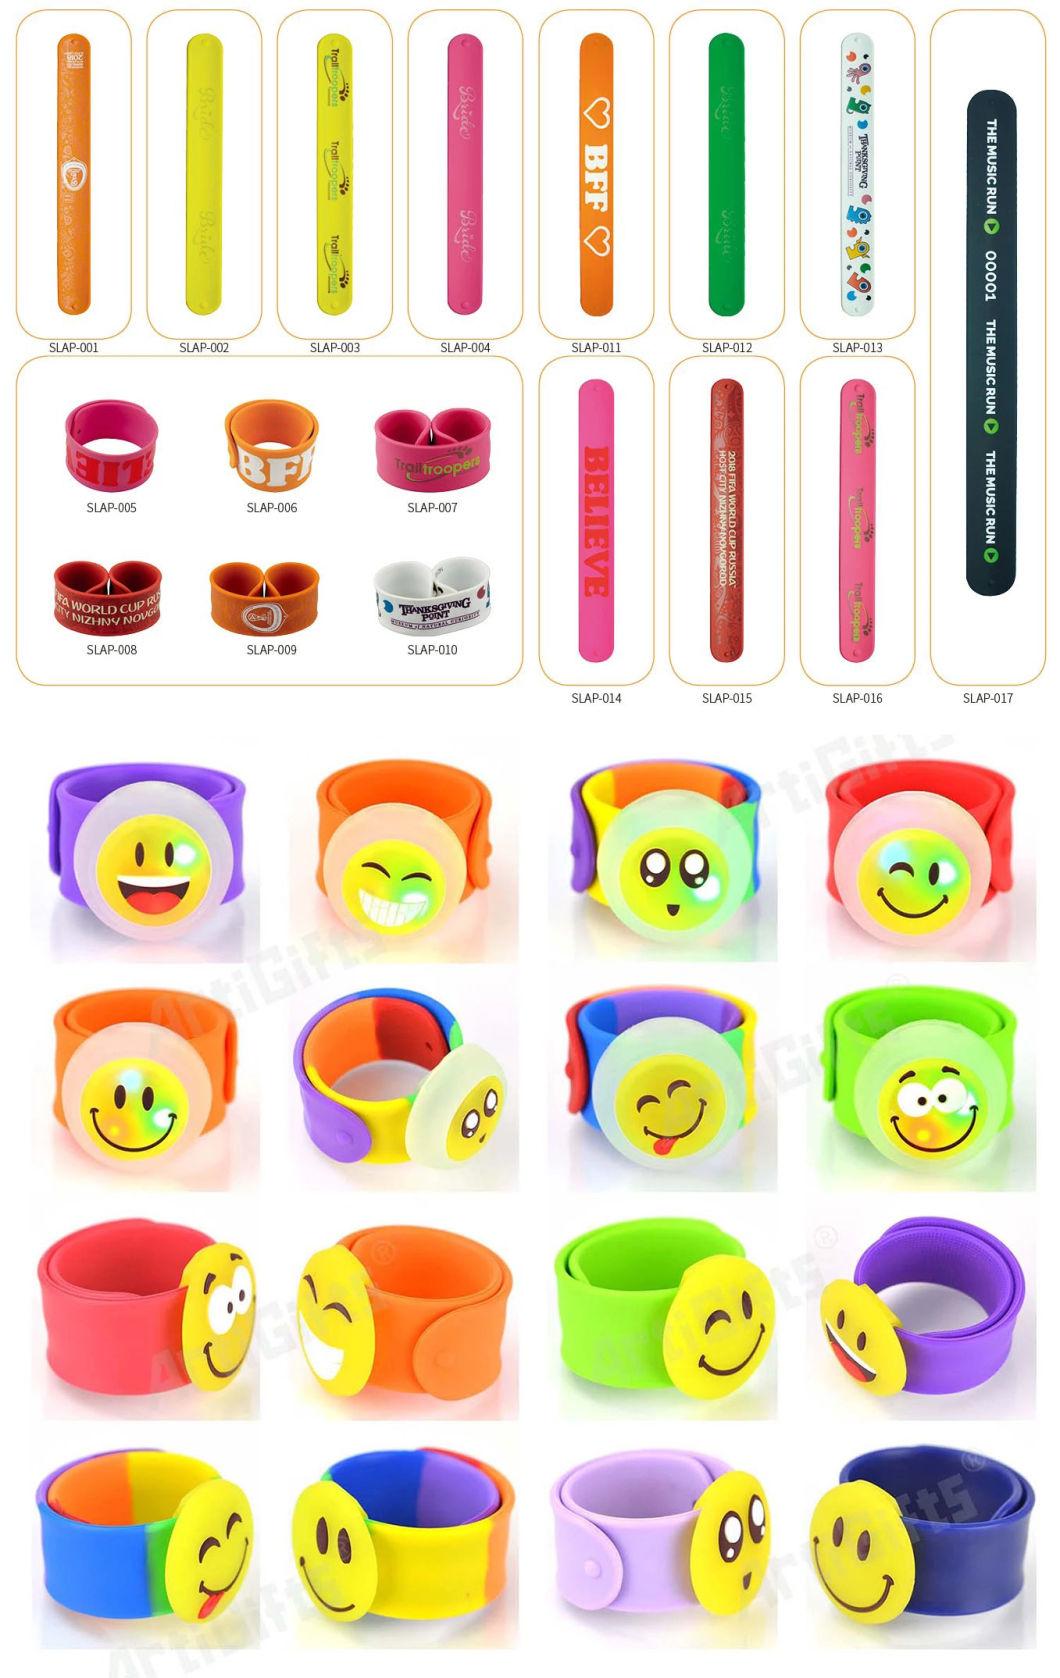 Popular Rubber Event Amazing Event Promotional Customized Silicone Bracelet